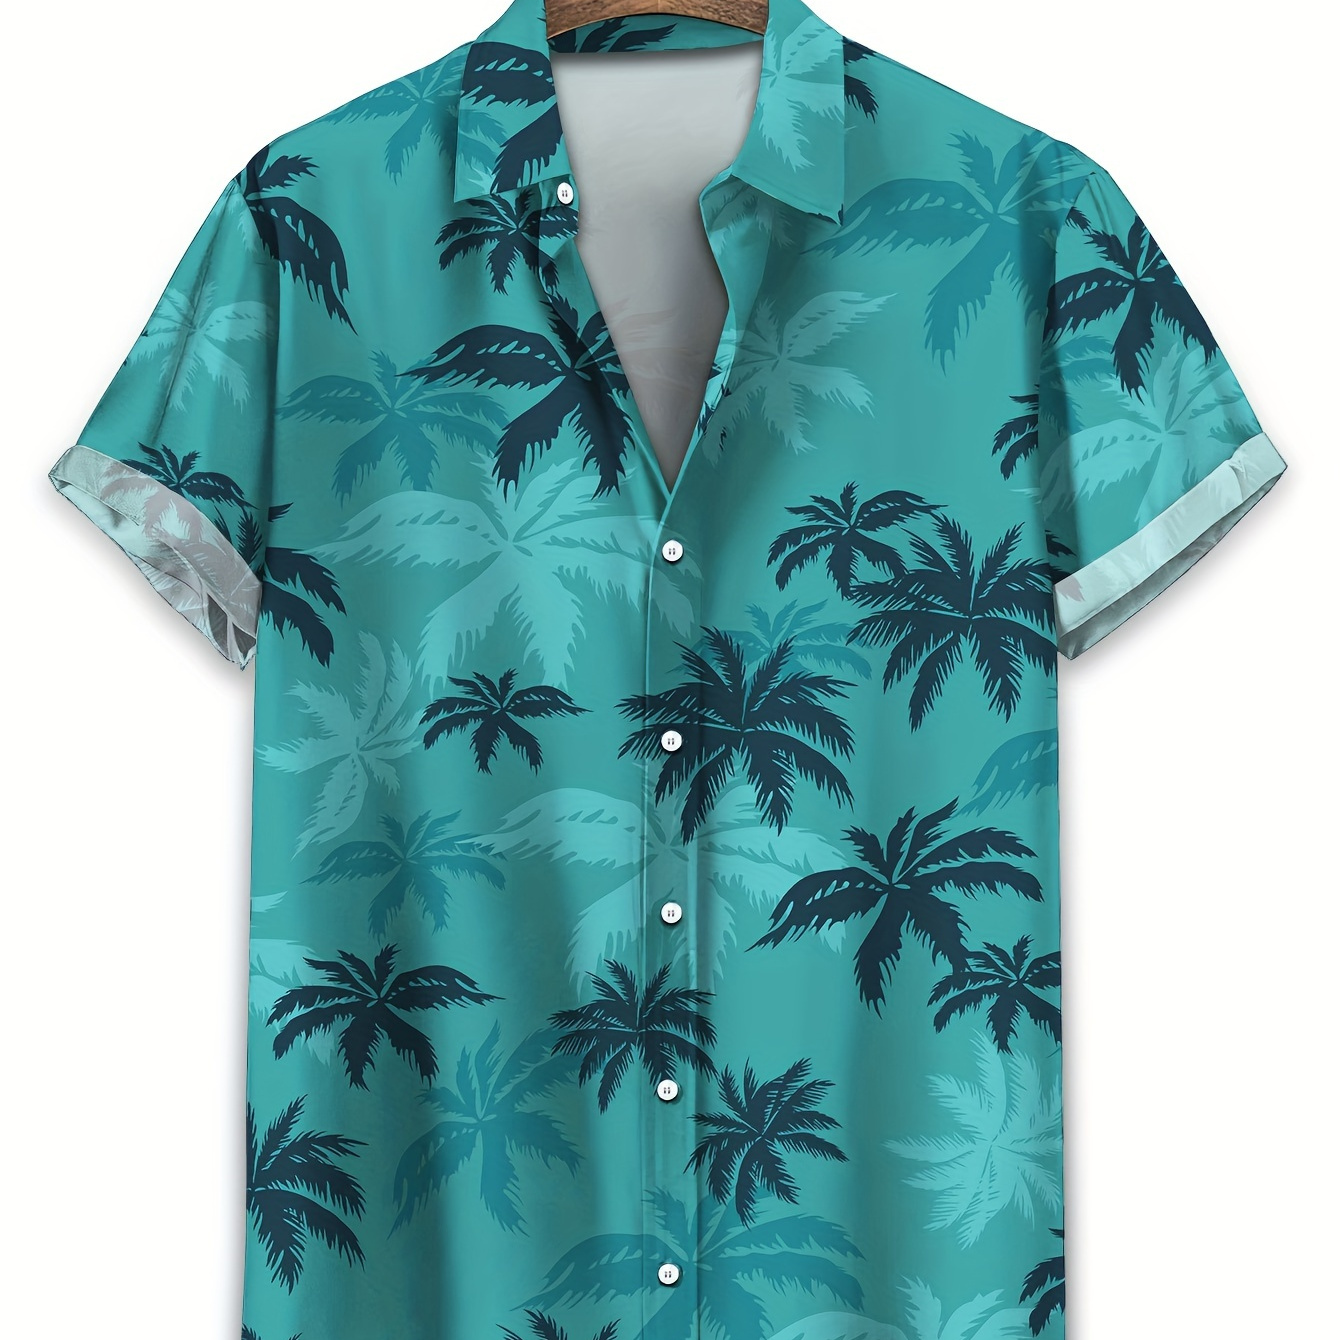 

Coconut Tree Print Men's Summer Fashionable And Simple Short Sleeve Button Casual Lapel Shirt, Trendy And Versatile, Suitable For Dates, Beach Holiday, As Gifts